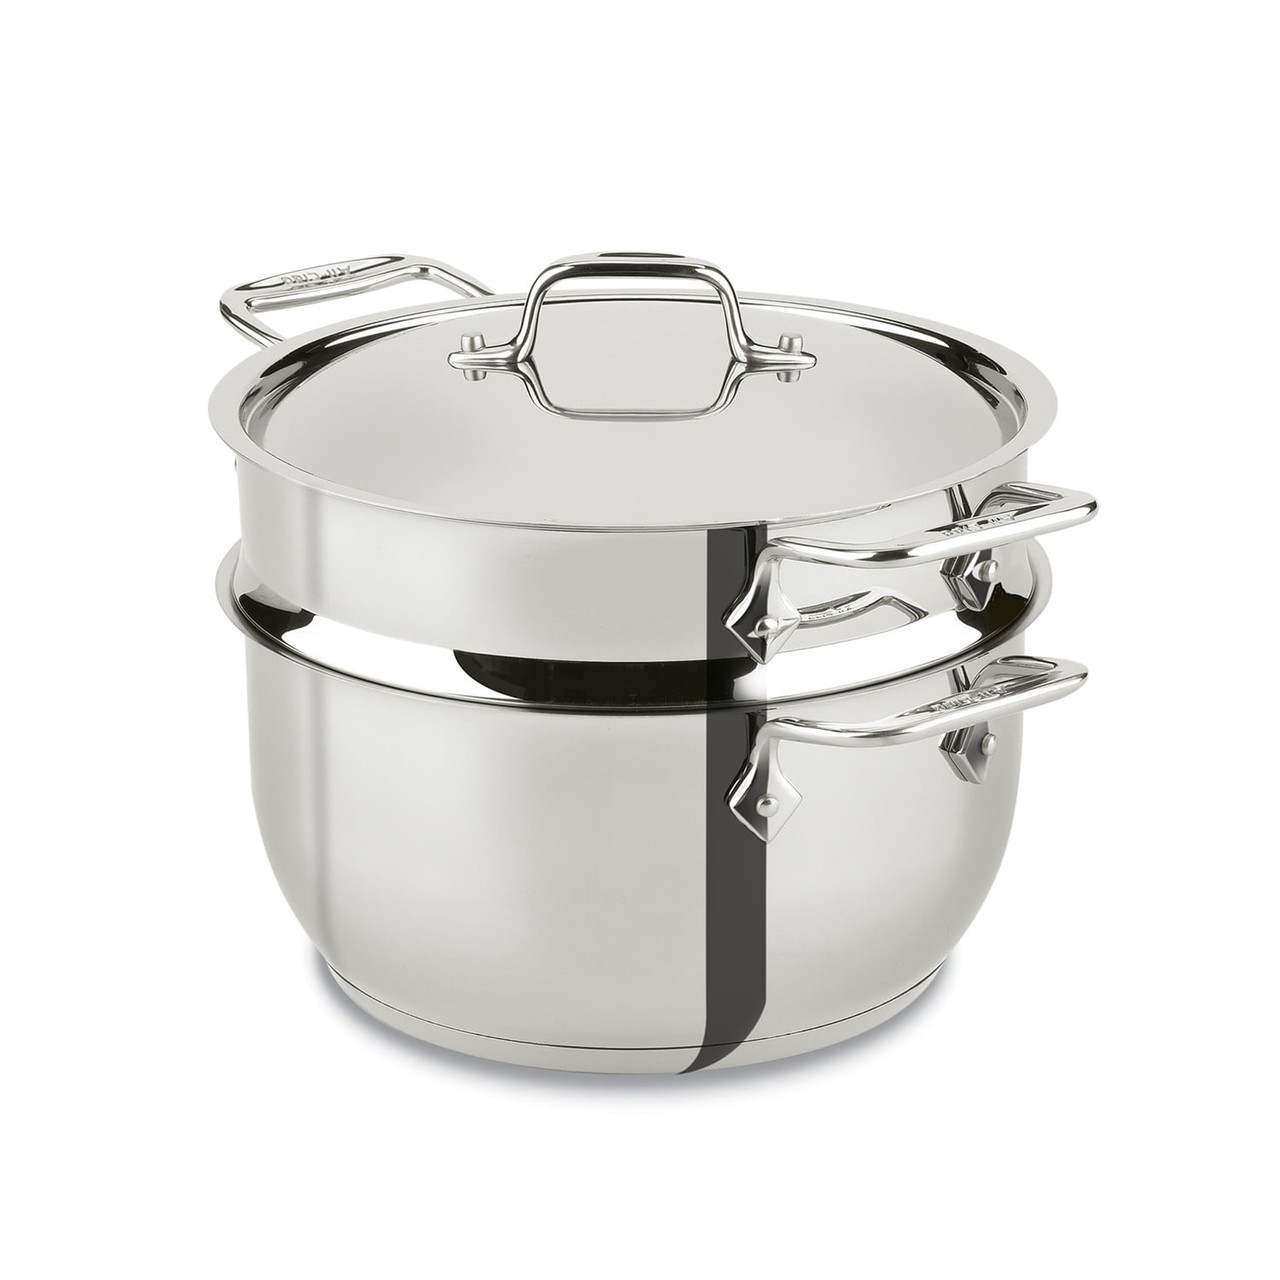 All-Clad Stainless-Steel 3-Qt. Double Boiler Insert